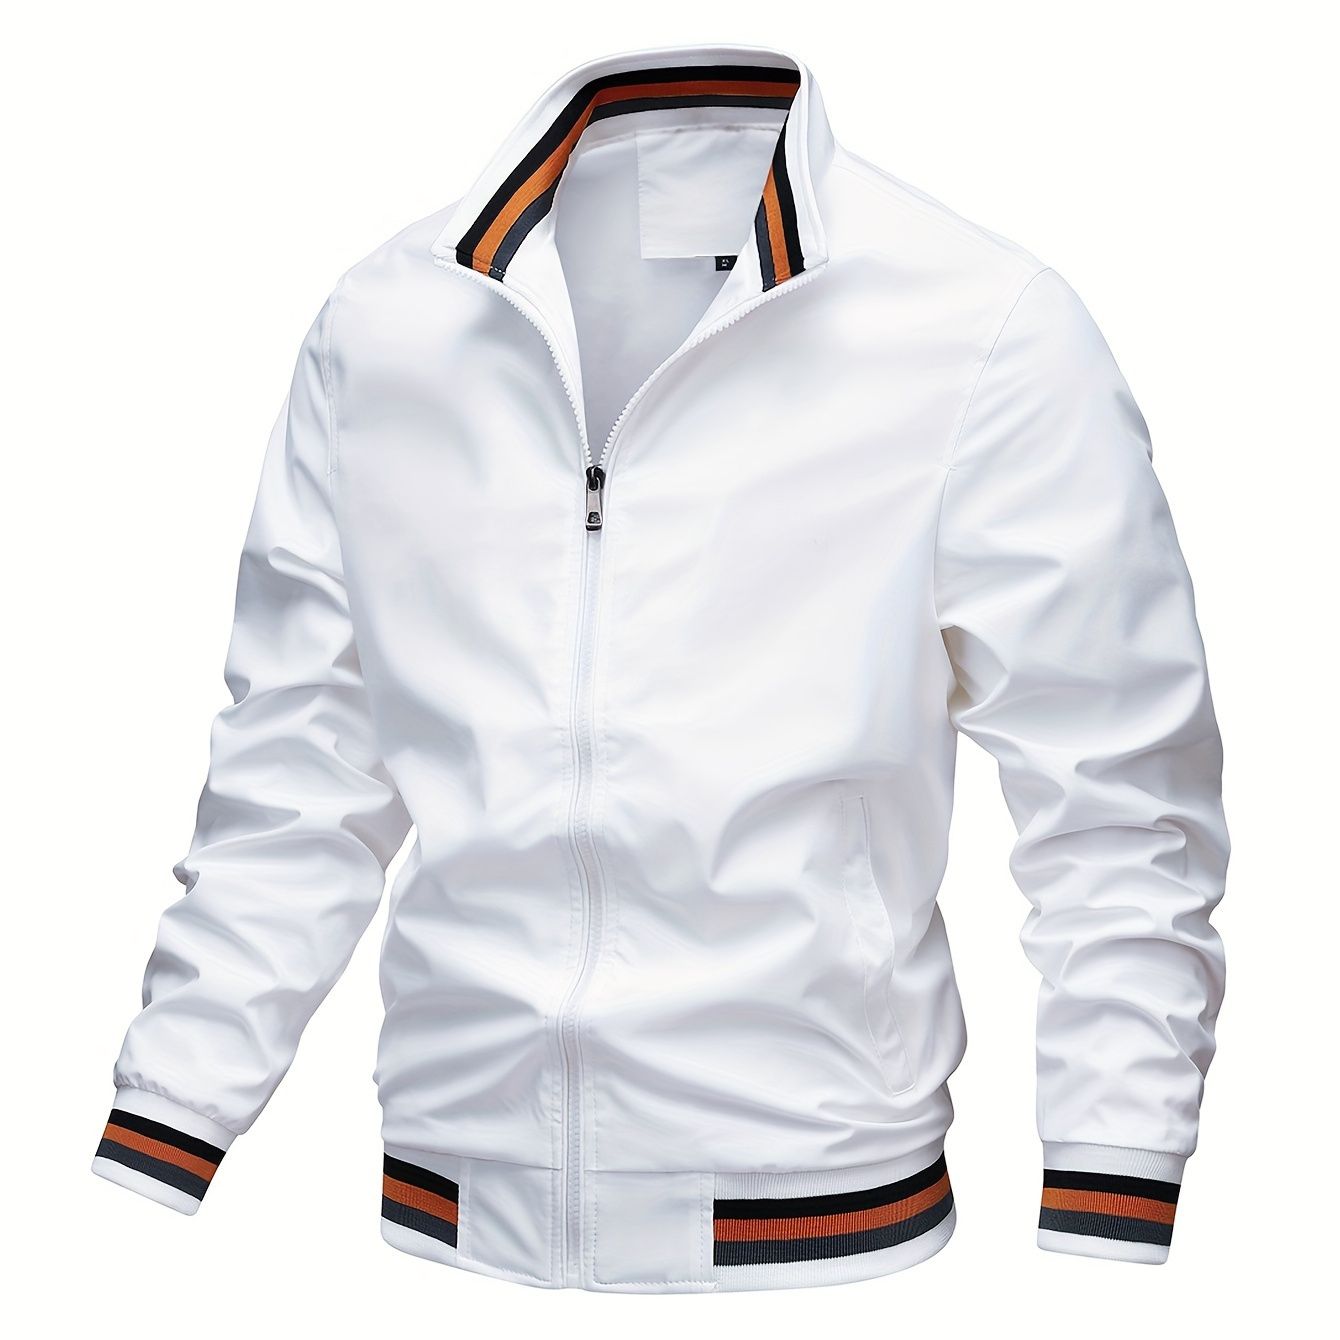 

Stripe Edge Bomber Jacket, Men's Casual Stand Collar Zip Up Jacket For Spring Summer Outdoor